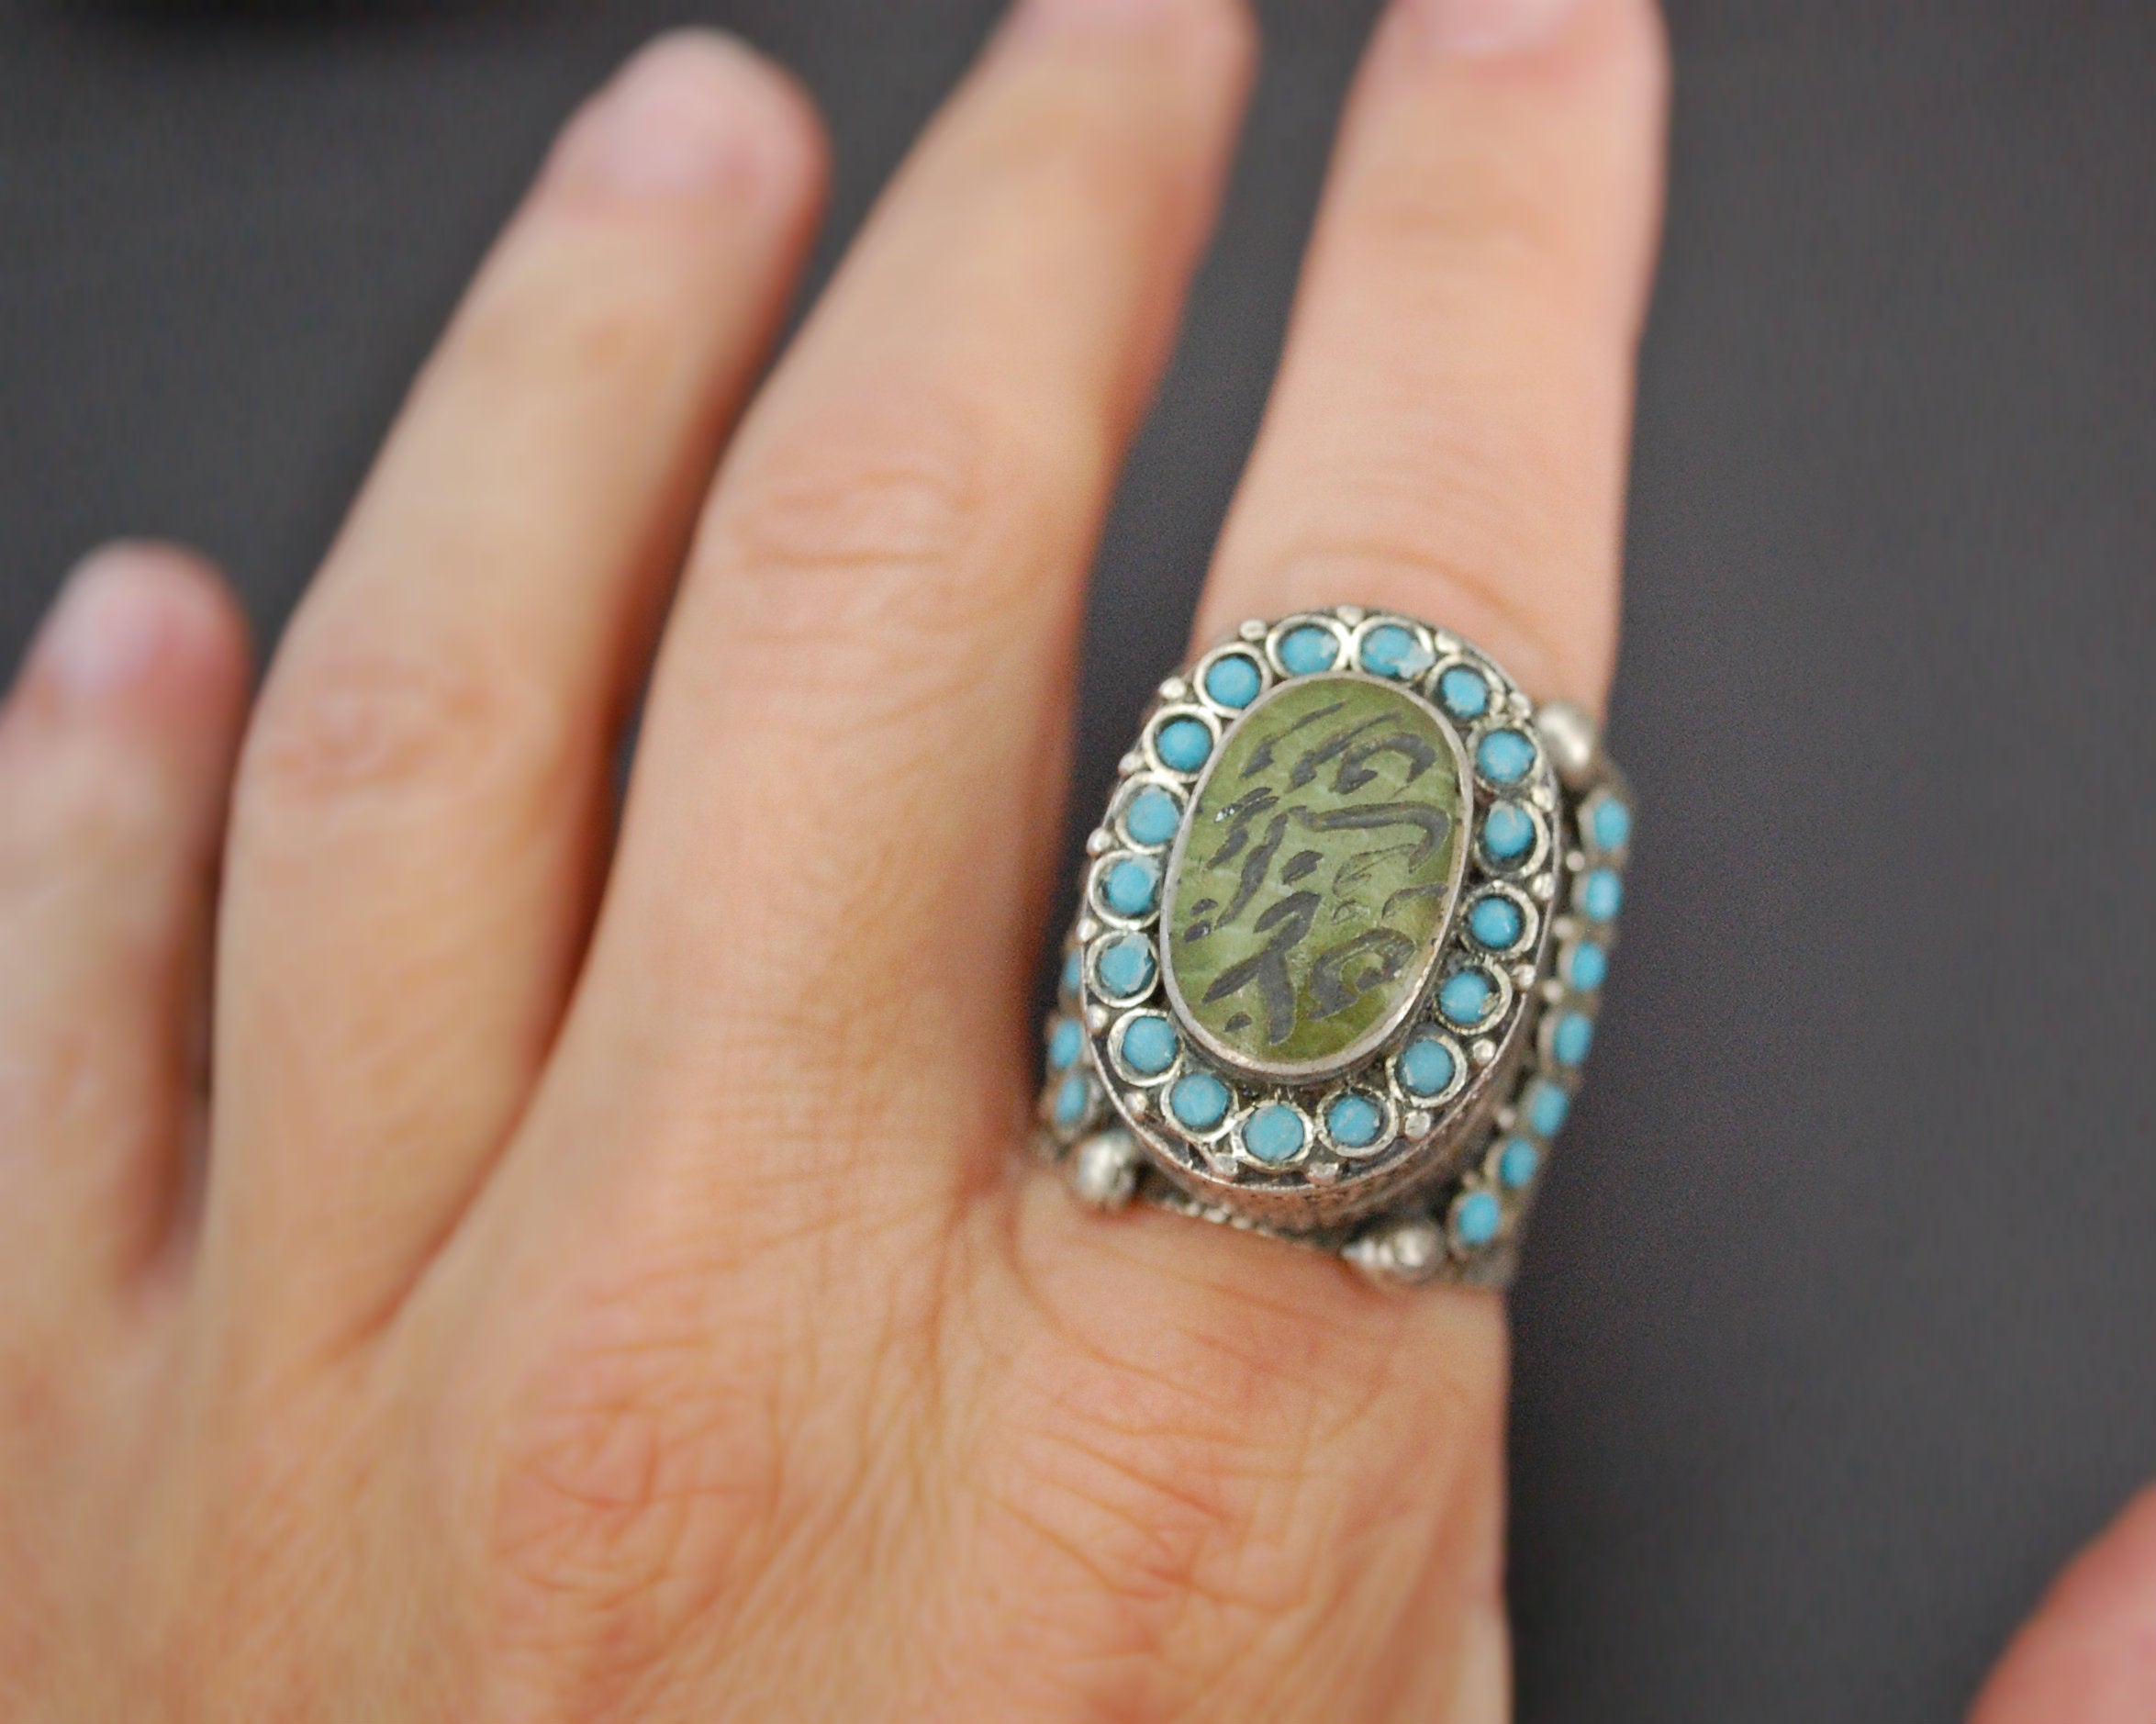 Antique Turkmen Ring with Turquoises - Size 9 / 9.5